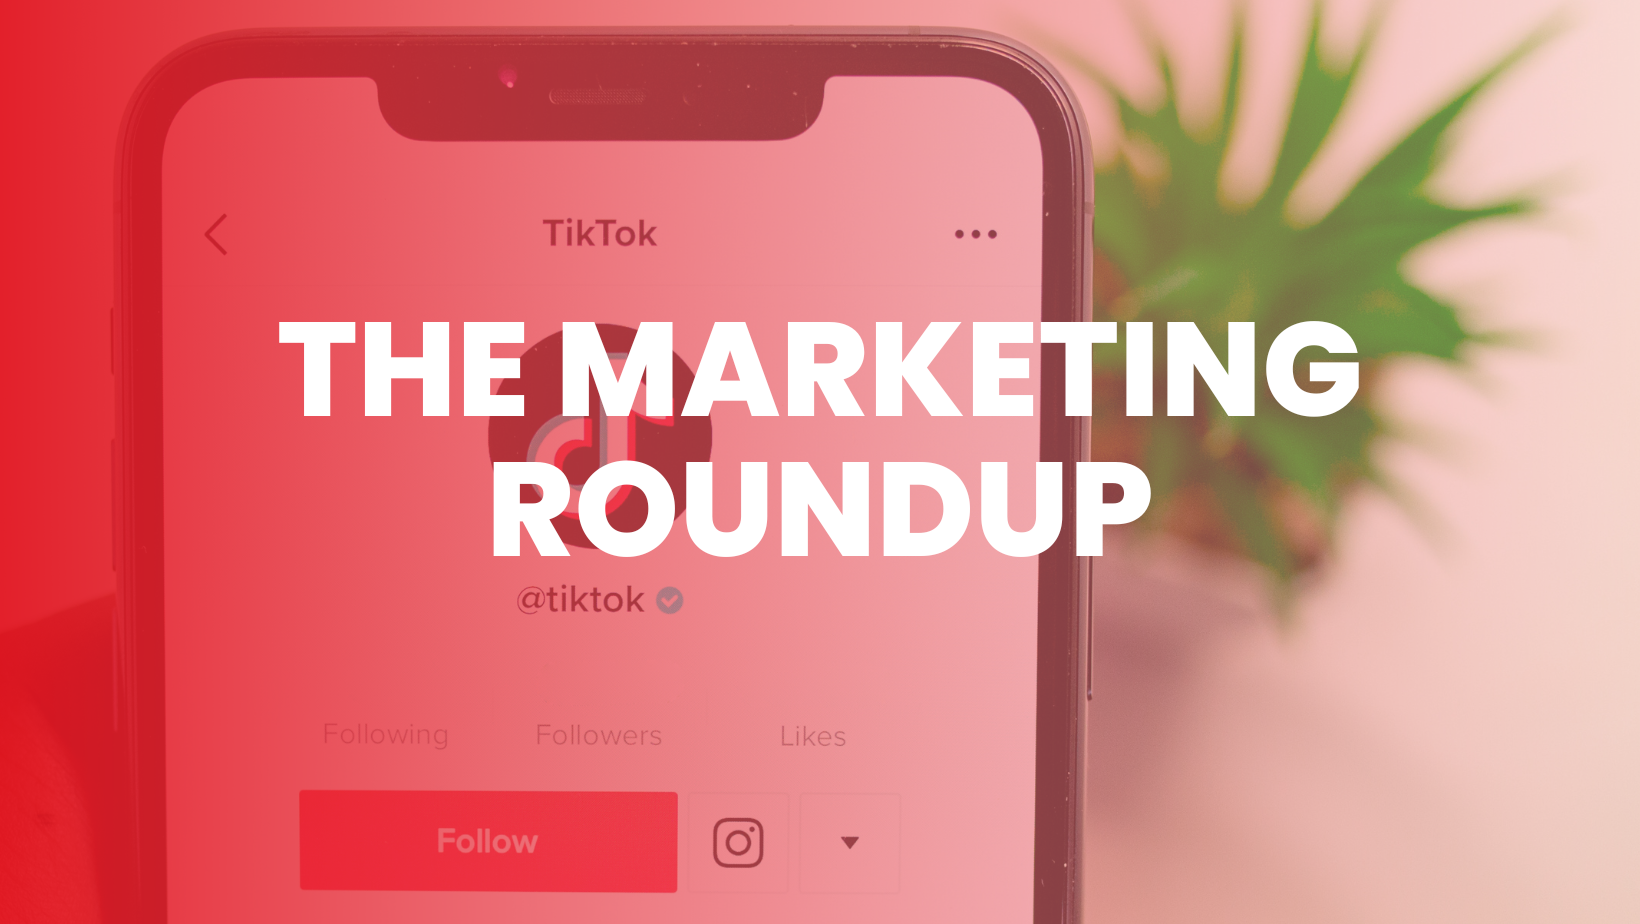 Image of TikTok on phone with red overlay and text The Marketing Roundup